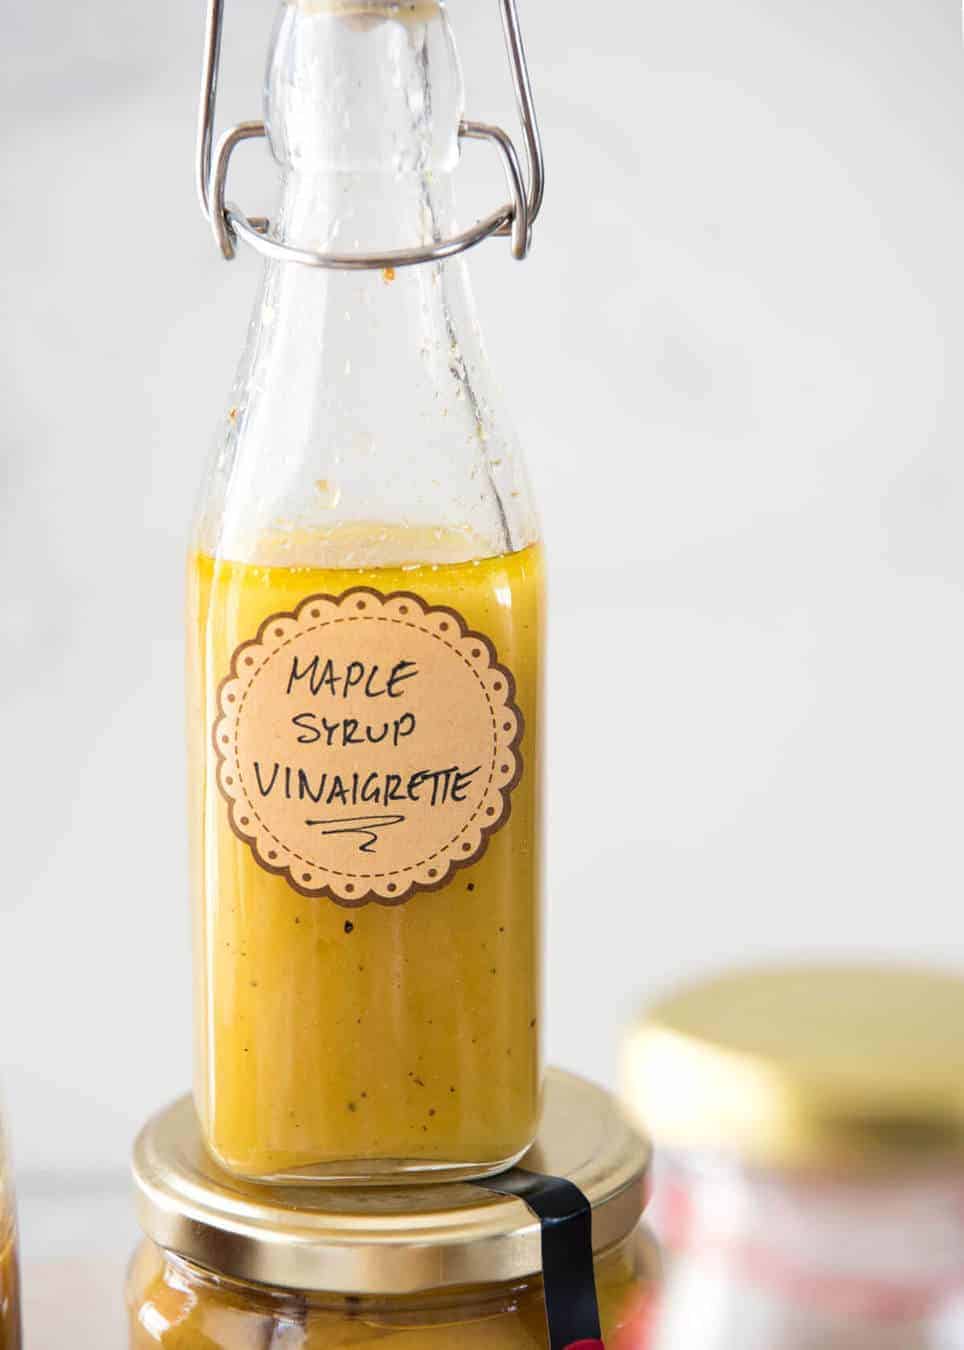 Maple Syrup Dressing made with maple syrup, cider vinegar, olive oil and mustard. Pairs especially well with roasted vegetable salads in a small bottle.